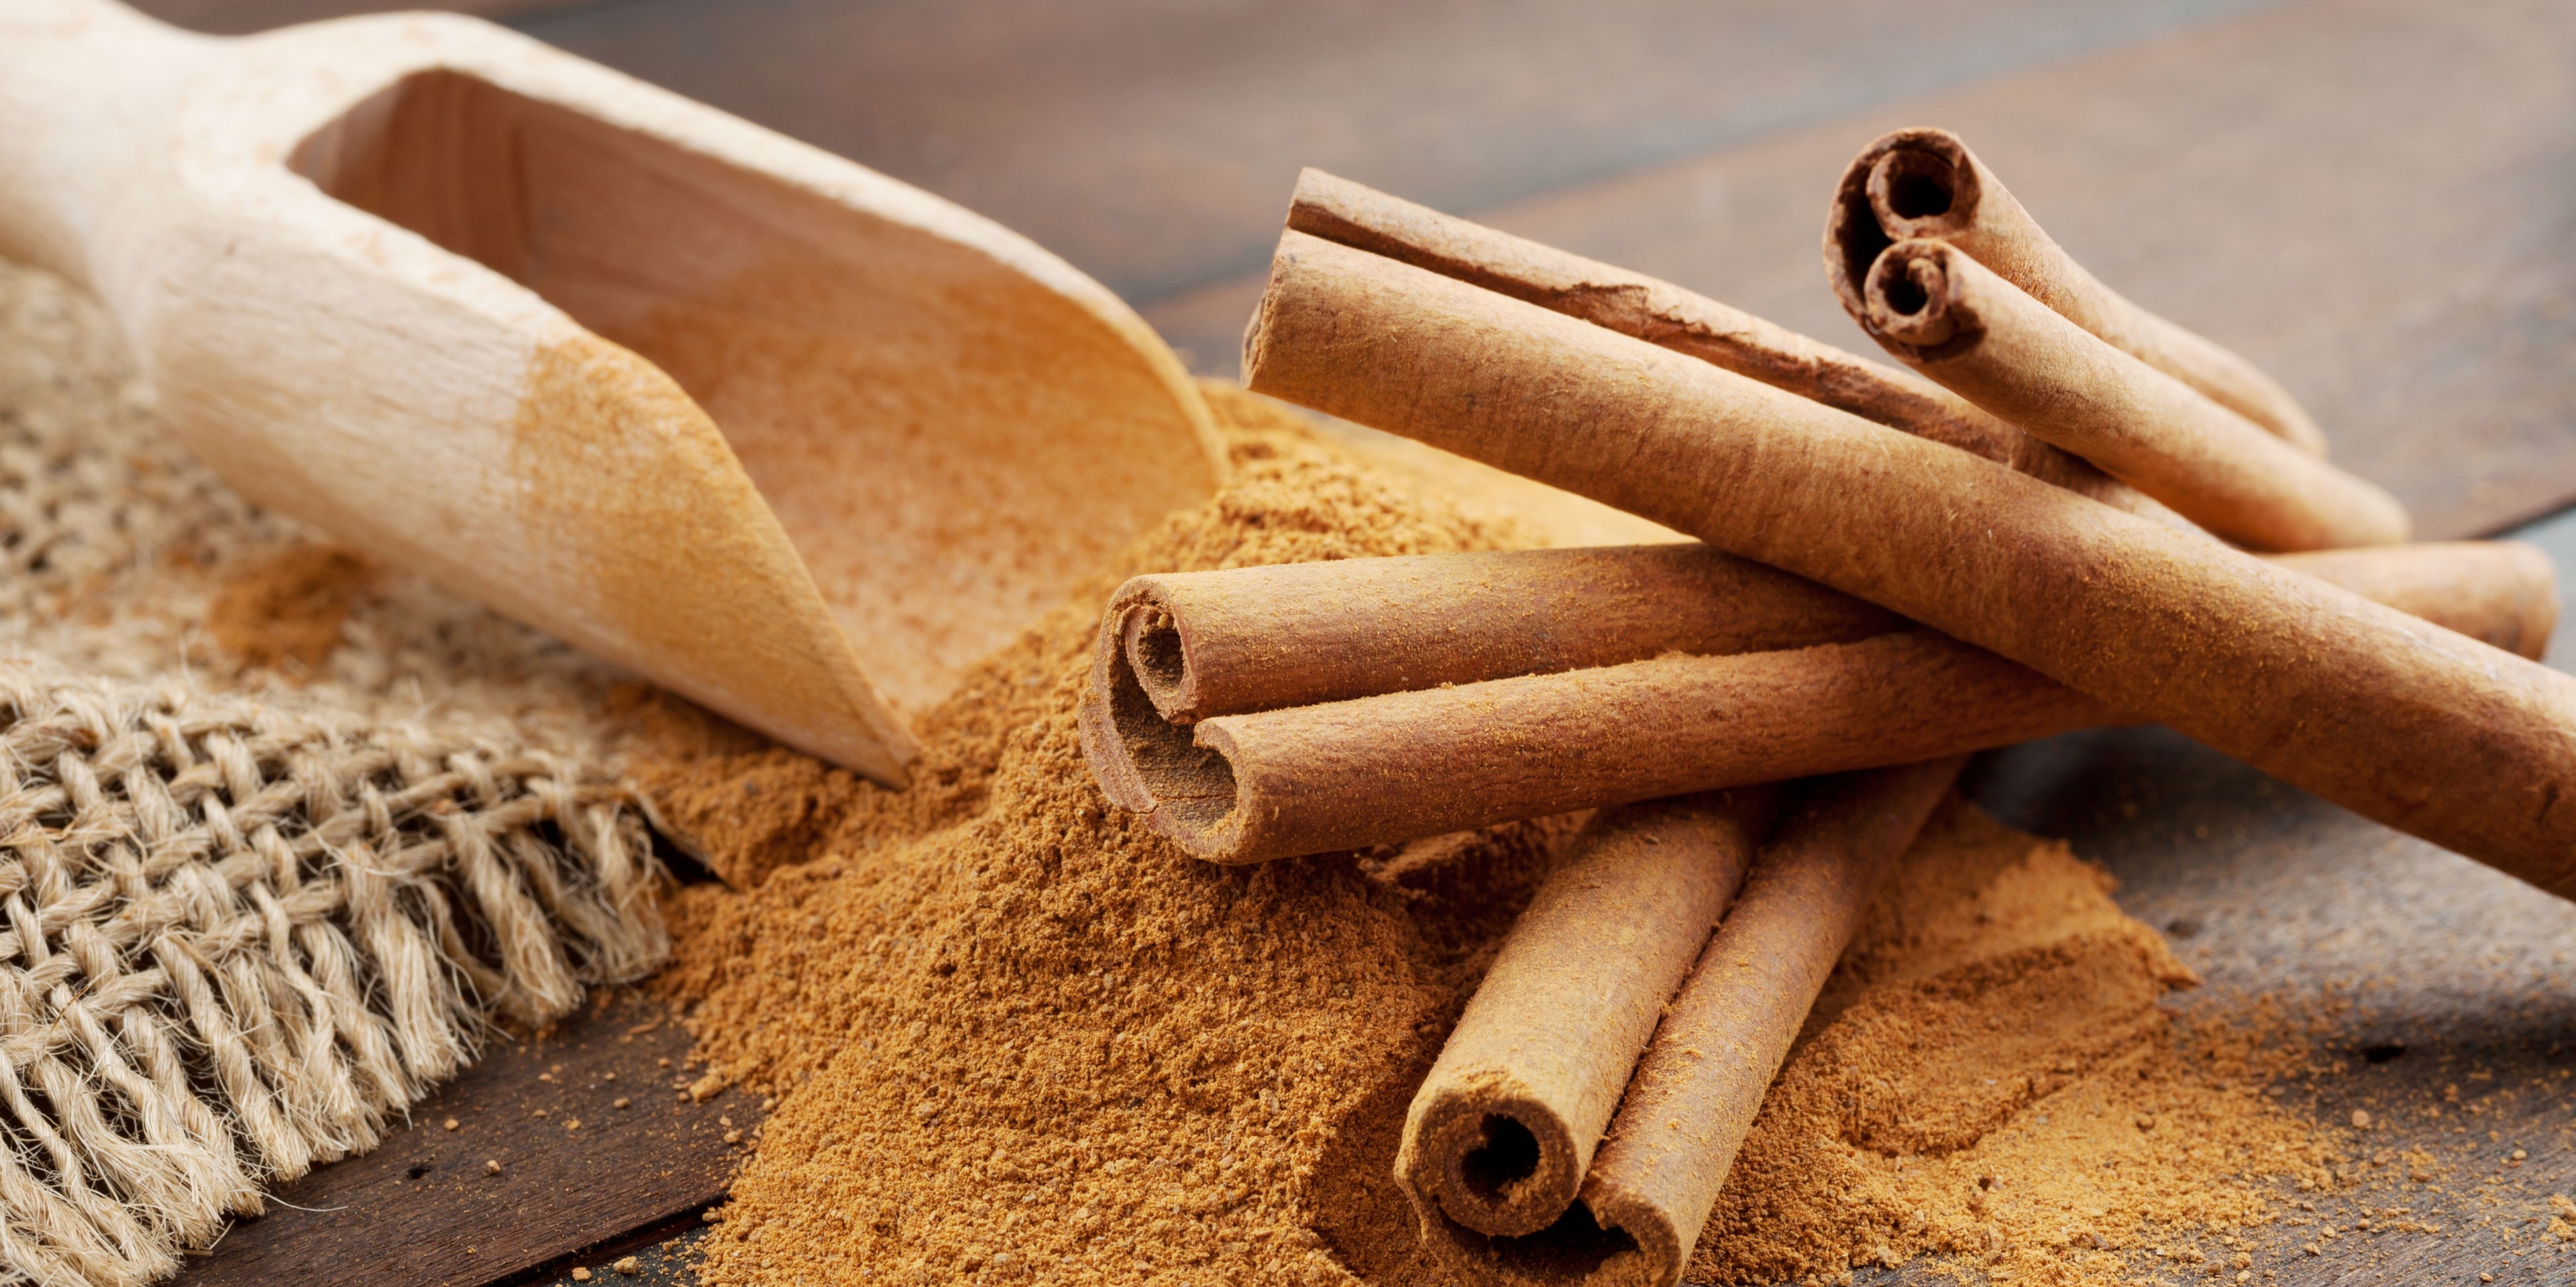 Stacked cinnamon stick on top of cinnamon powder with a wooden scoop